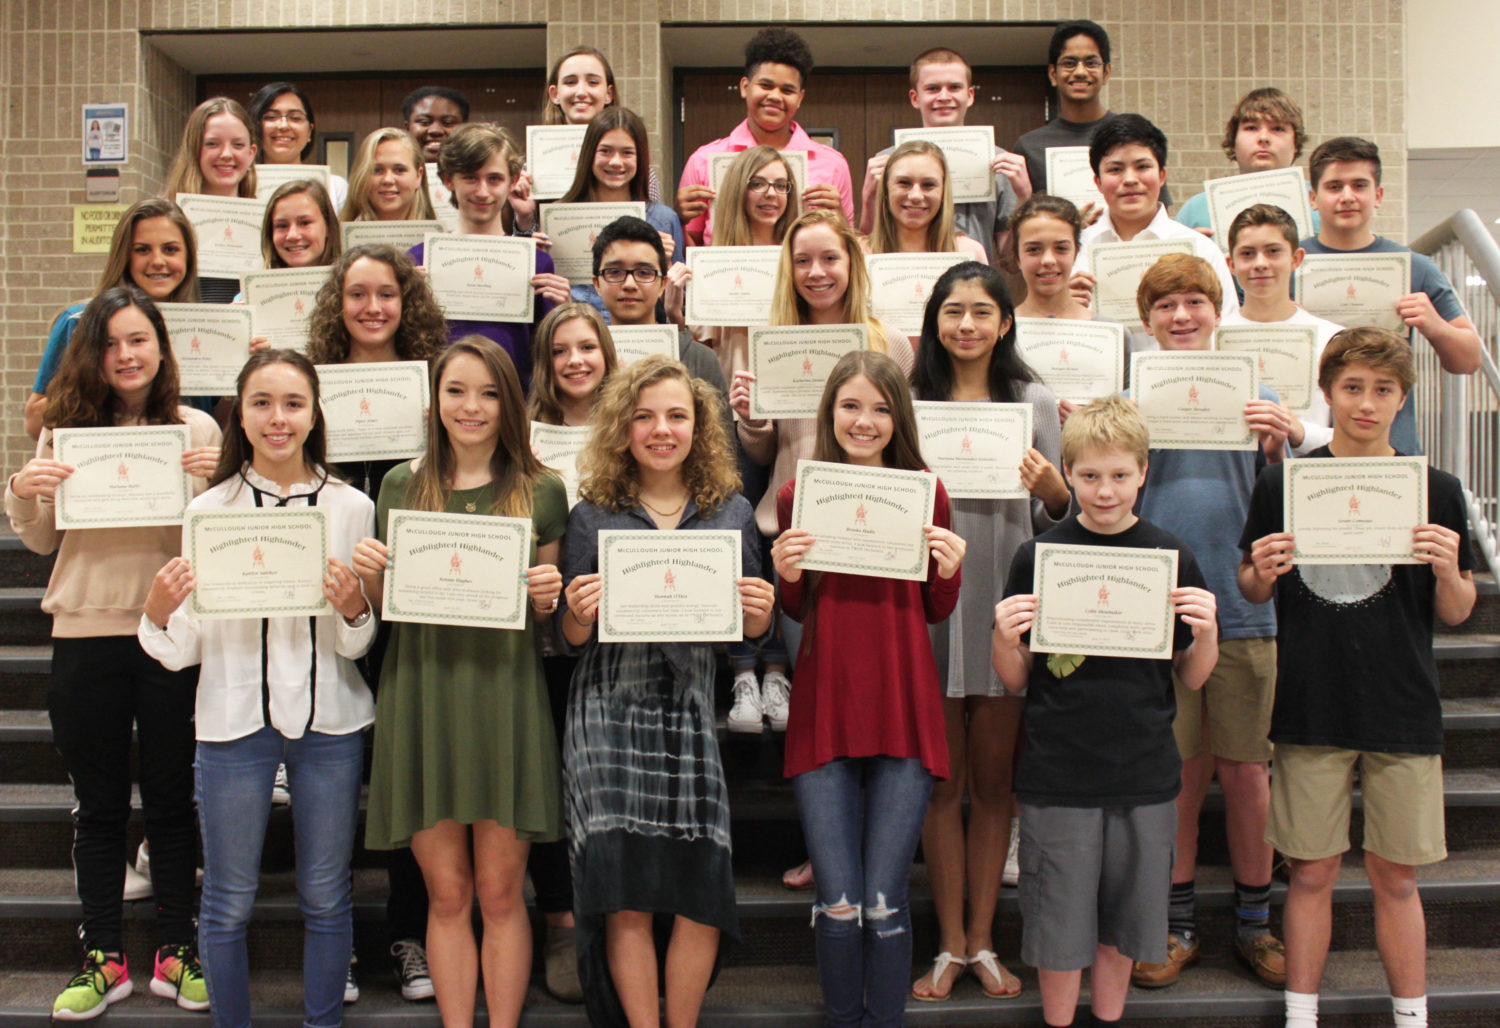 Eighth grade students at McCullough JH were honored with Highlighted Highlander Awards for outstanding achievement in academics, integrity, kindness, helpfulness, and all around greatness.